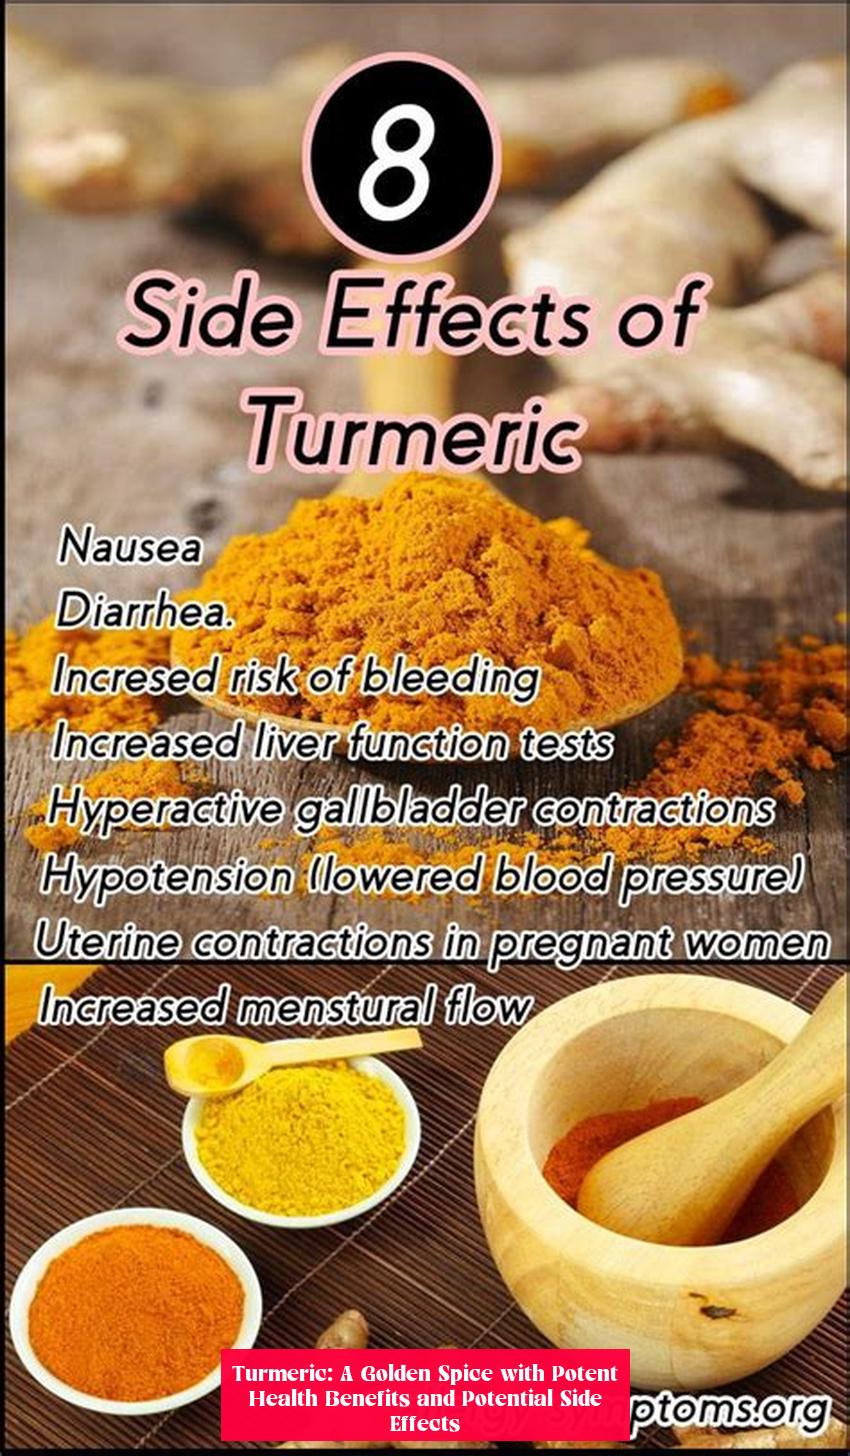 Turmeric: A Golden Spice with Potent Health Benefits and Potential Side Effects